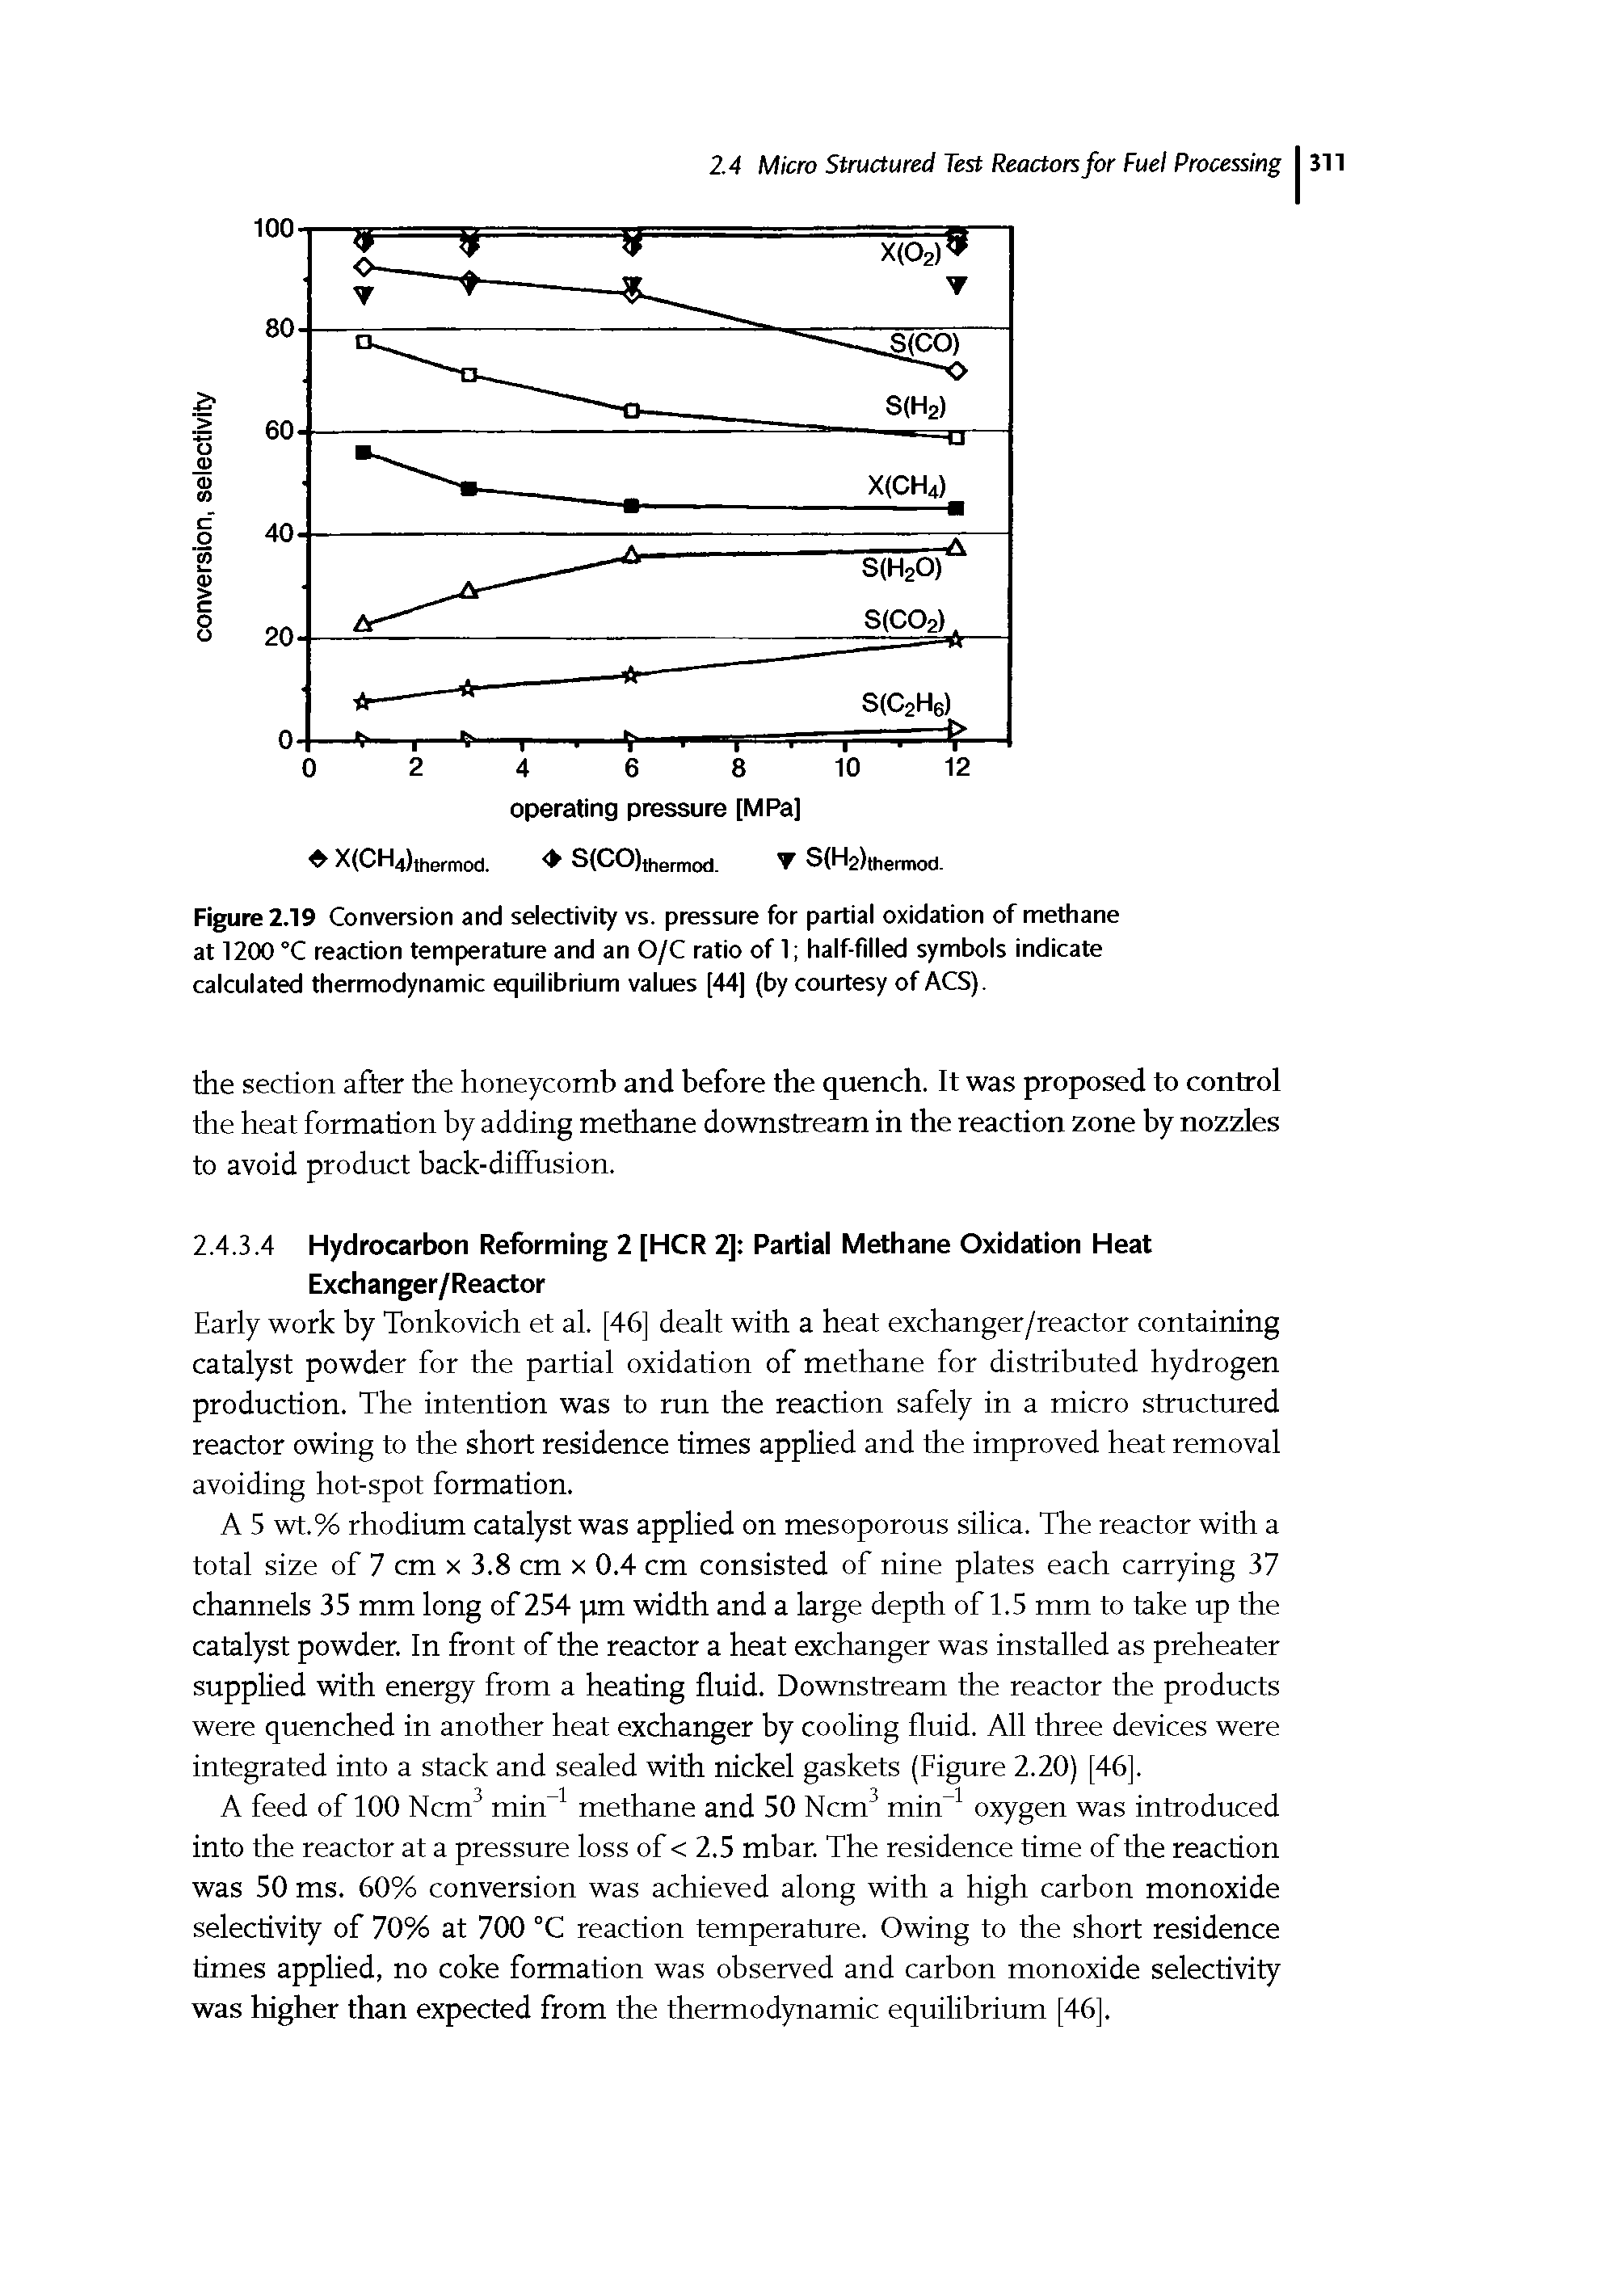 Figure 2.19 Conversion and selectivity vs. pressure for partial oxidation of methane at 1200 °C reaction temperature and an O/C ratio of 1 half-filled symbols indicate calculated thermodynamic equilibrium values [44] (by courtesy of ACS).